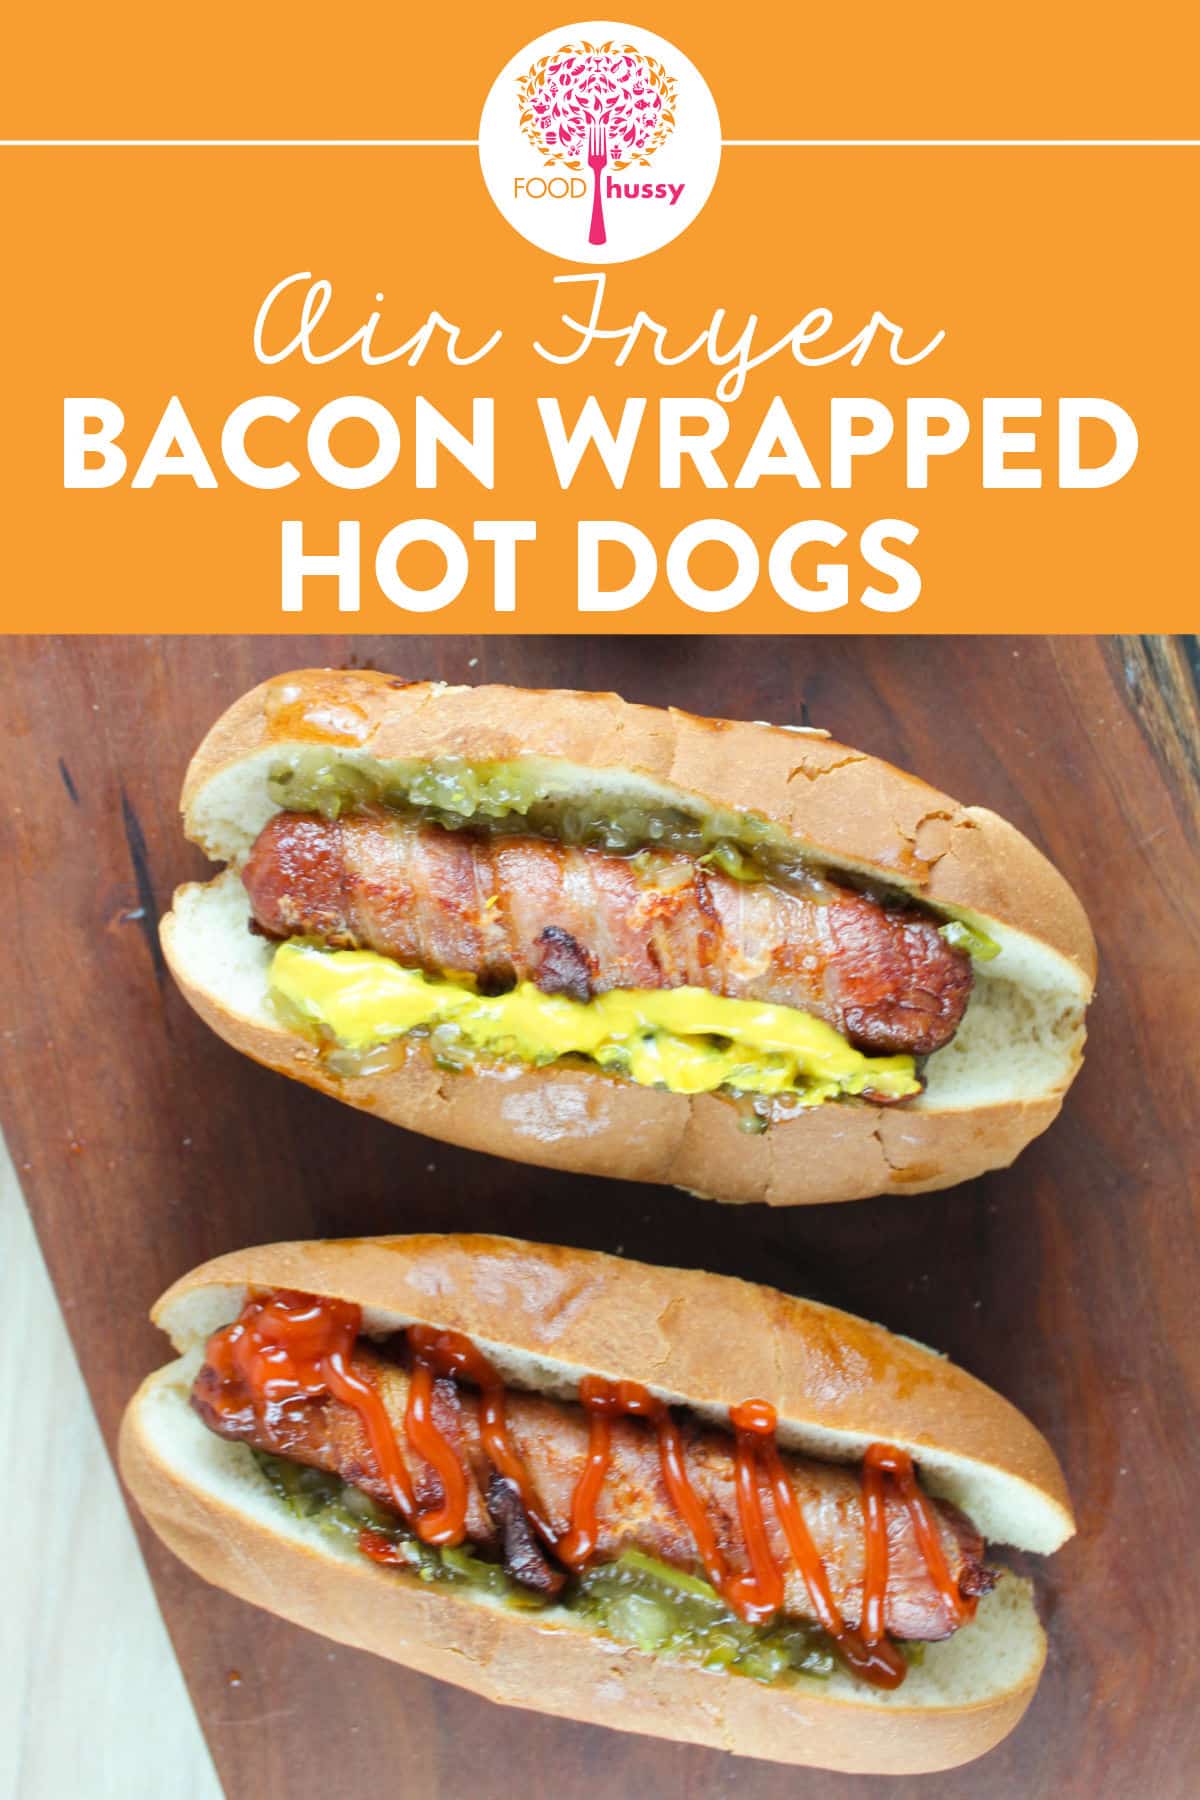 Bacon Wrapped Hot Dogs in the Air Fryer are a delicious, salty & savory way to make hot dogs even better! Plus - making them in the air fryer means they're quick!  via @foodhussy